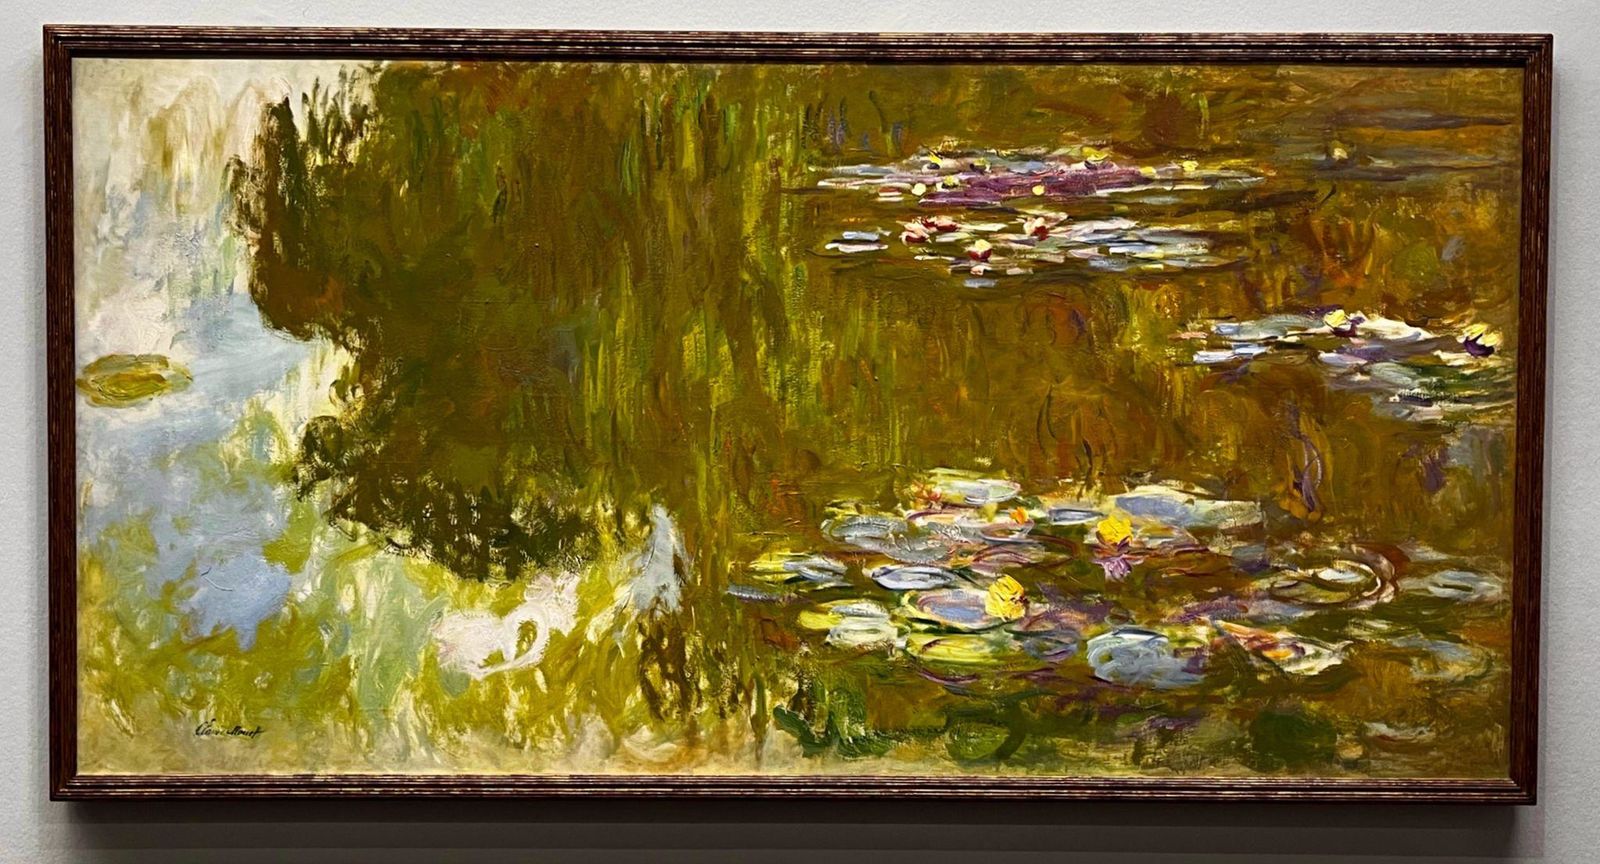 Monet’s famous lily pond painting